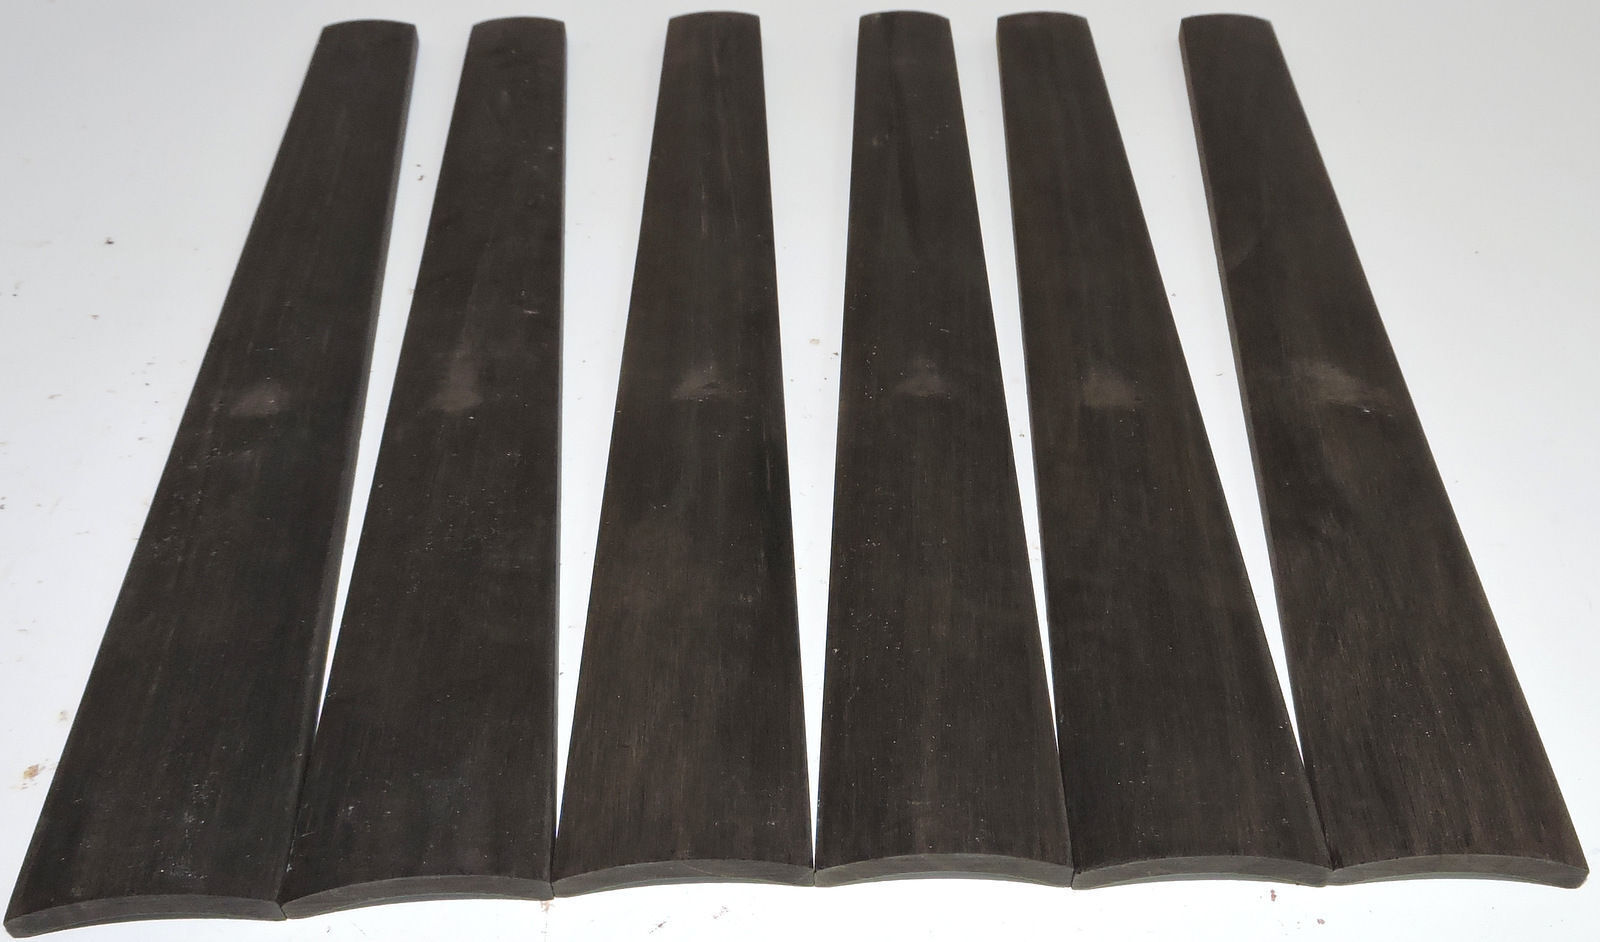 Six 4/4 Violin Gabon Ebony Fingerboards Violins Violas AAA Quality Shipped Free Globalwoods Does Not Apply